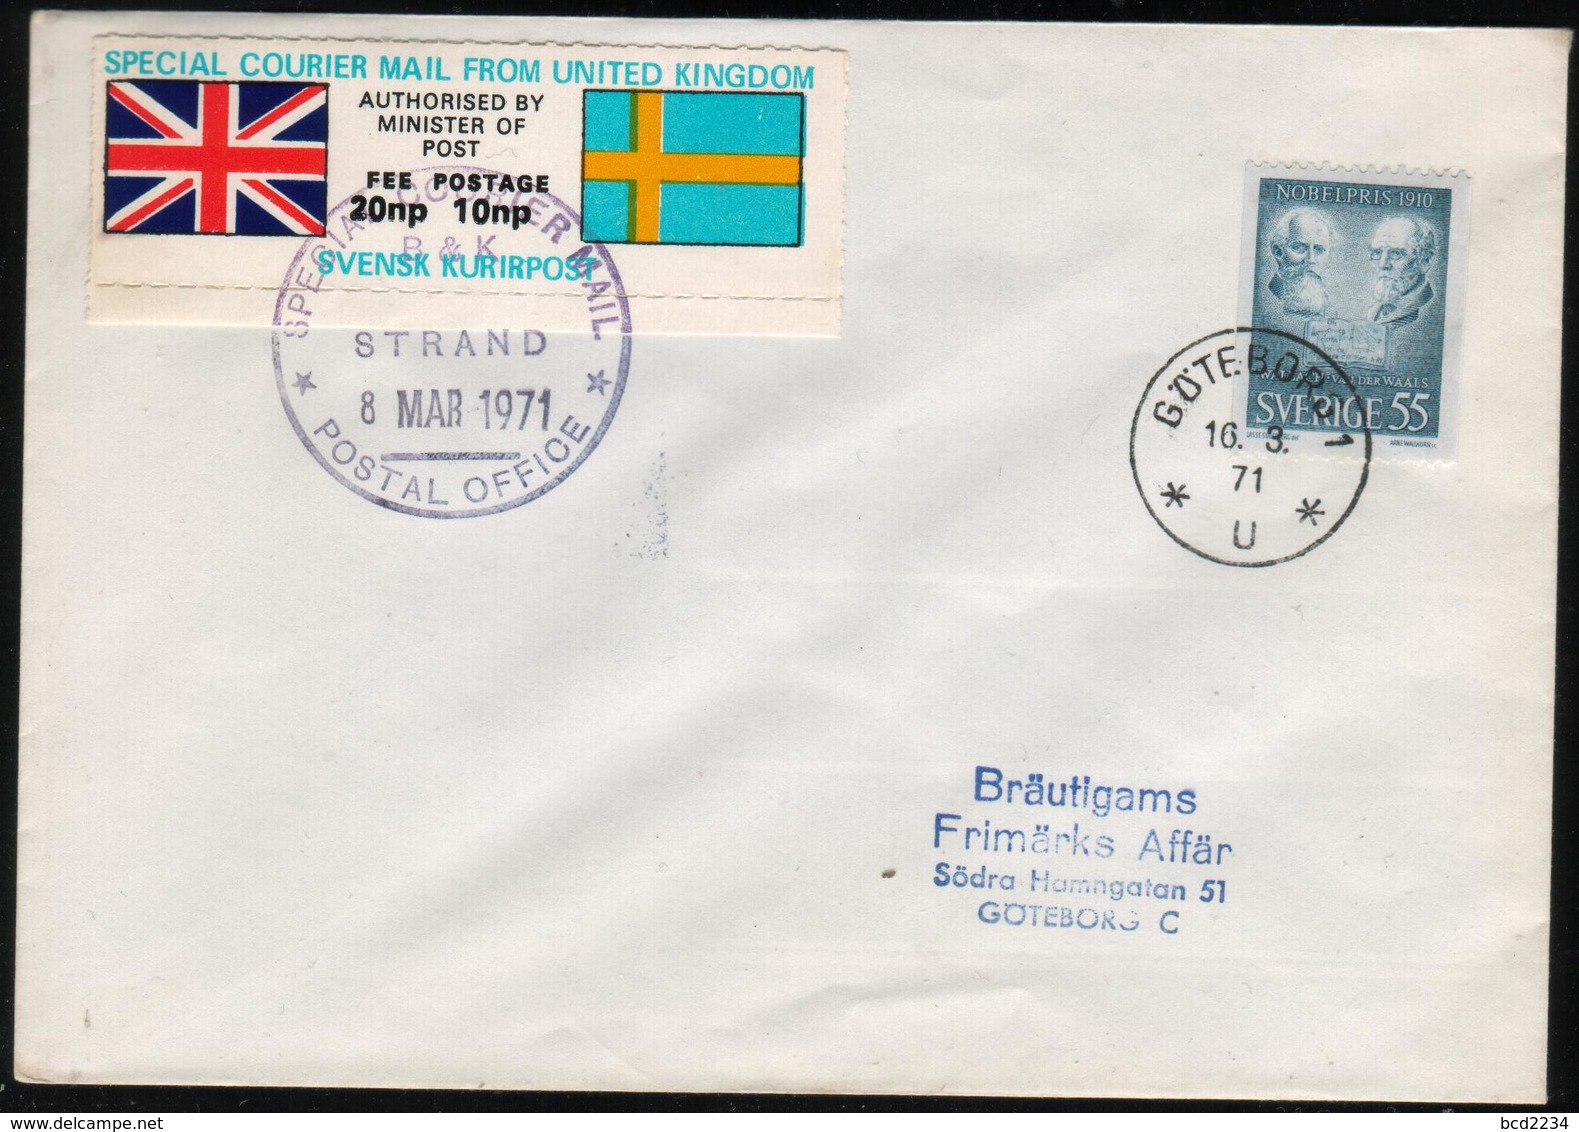 GREAT BRITAIN GB 1971 POSTAL STRIKE MAIL SPECIAL COURIER MAIL 2ND ISSUE DECIMAL COVER TO GOTEBORG SWEDEN 8 MARCH - Plaatfouten En Curiosa